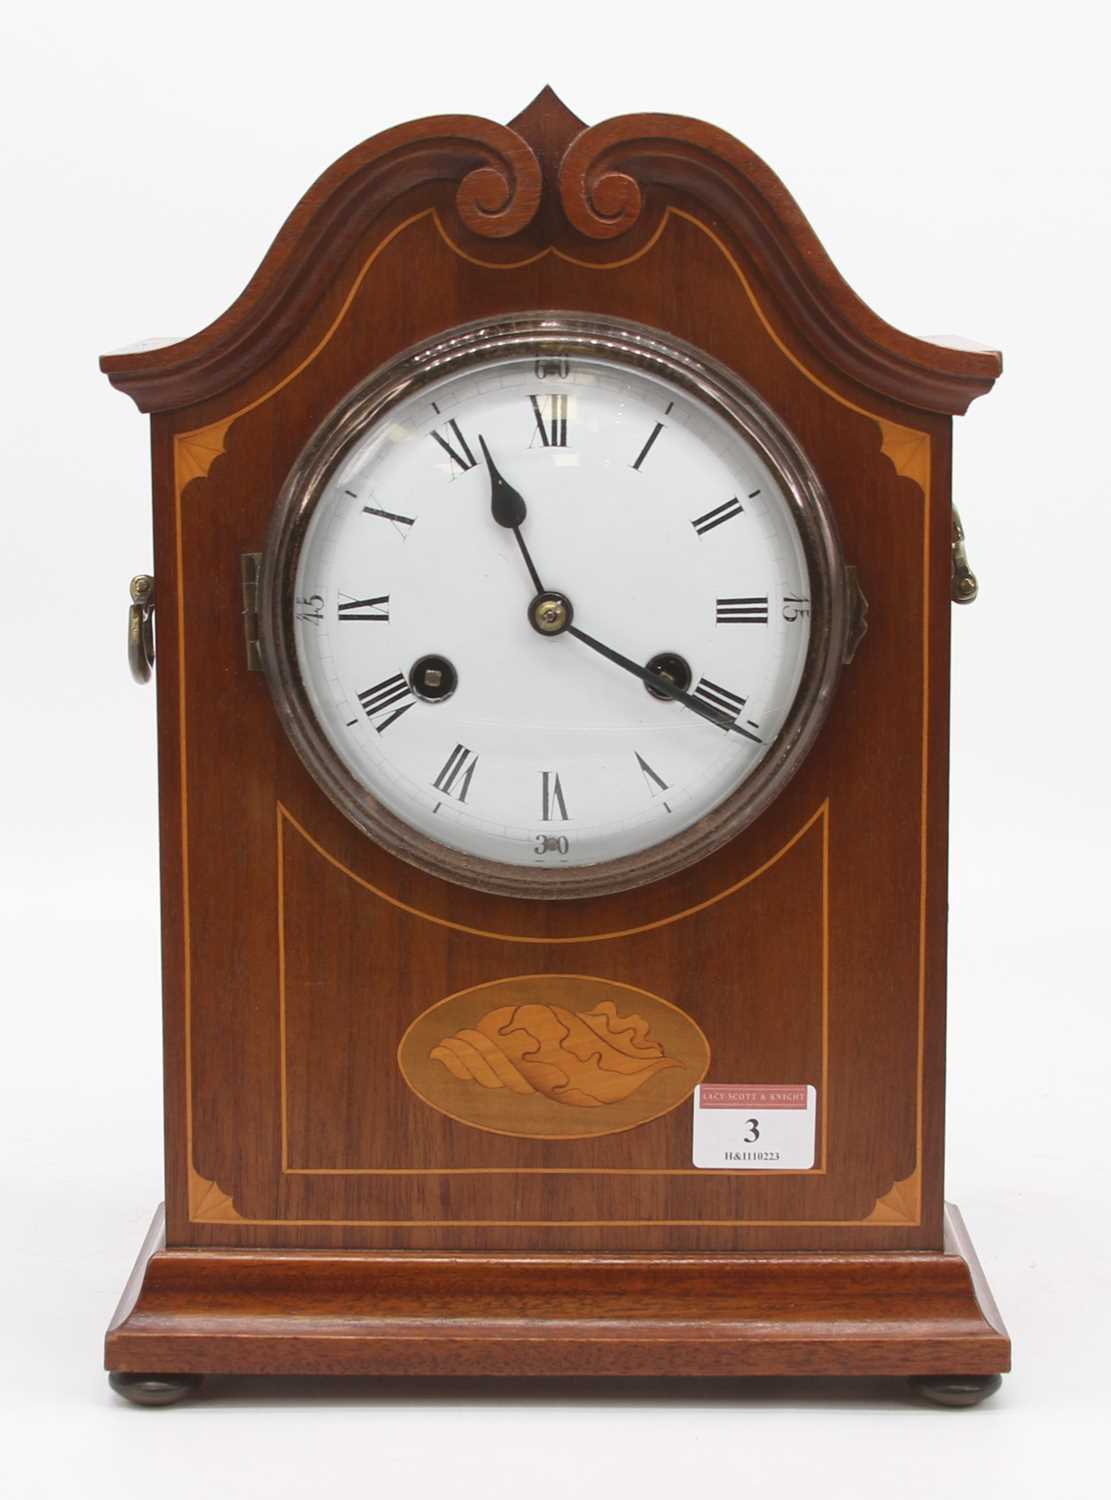 An early 20th century mahogany and box wood strung mantel clock, the enamel dial showing Roman